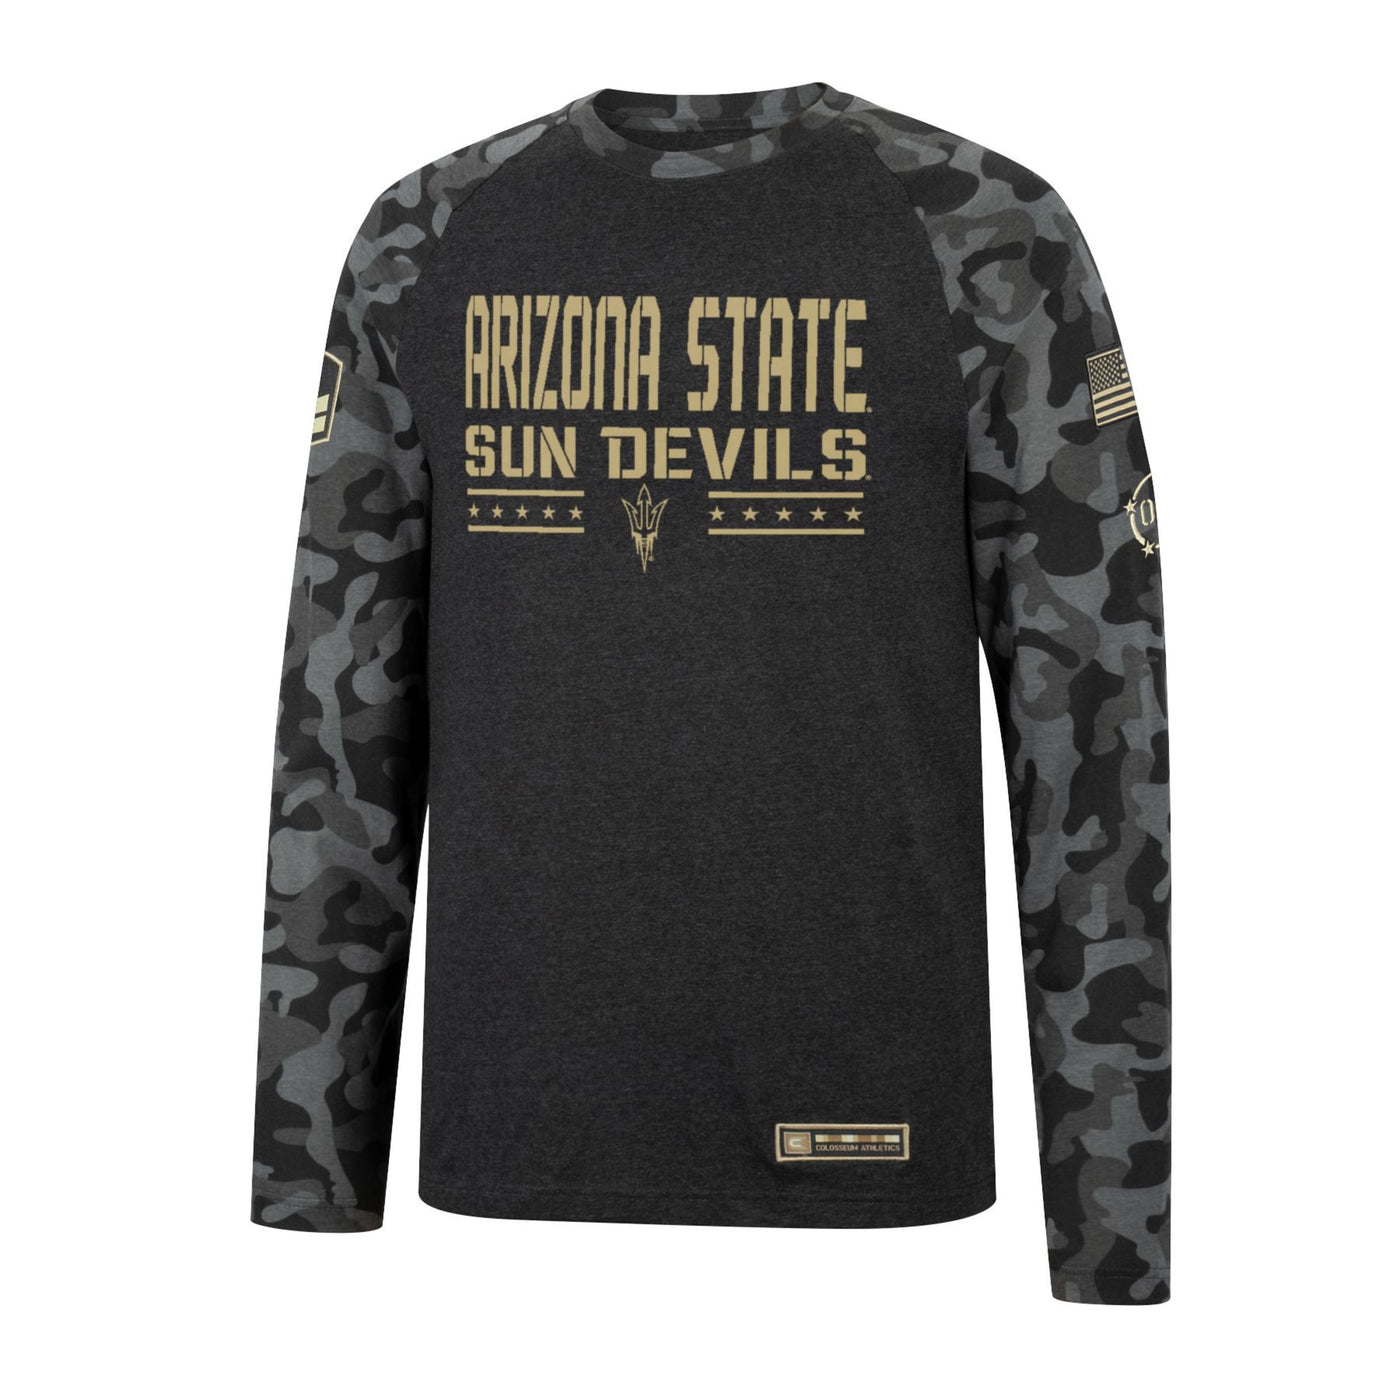 ASU grey body and grey camo long sleeve. Arizona State Sundevils text in tan with tan pitchfork on the chest. One tan icon on the left arm and two tan icons on the right arm. 